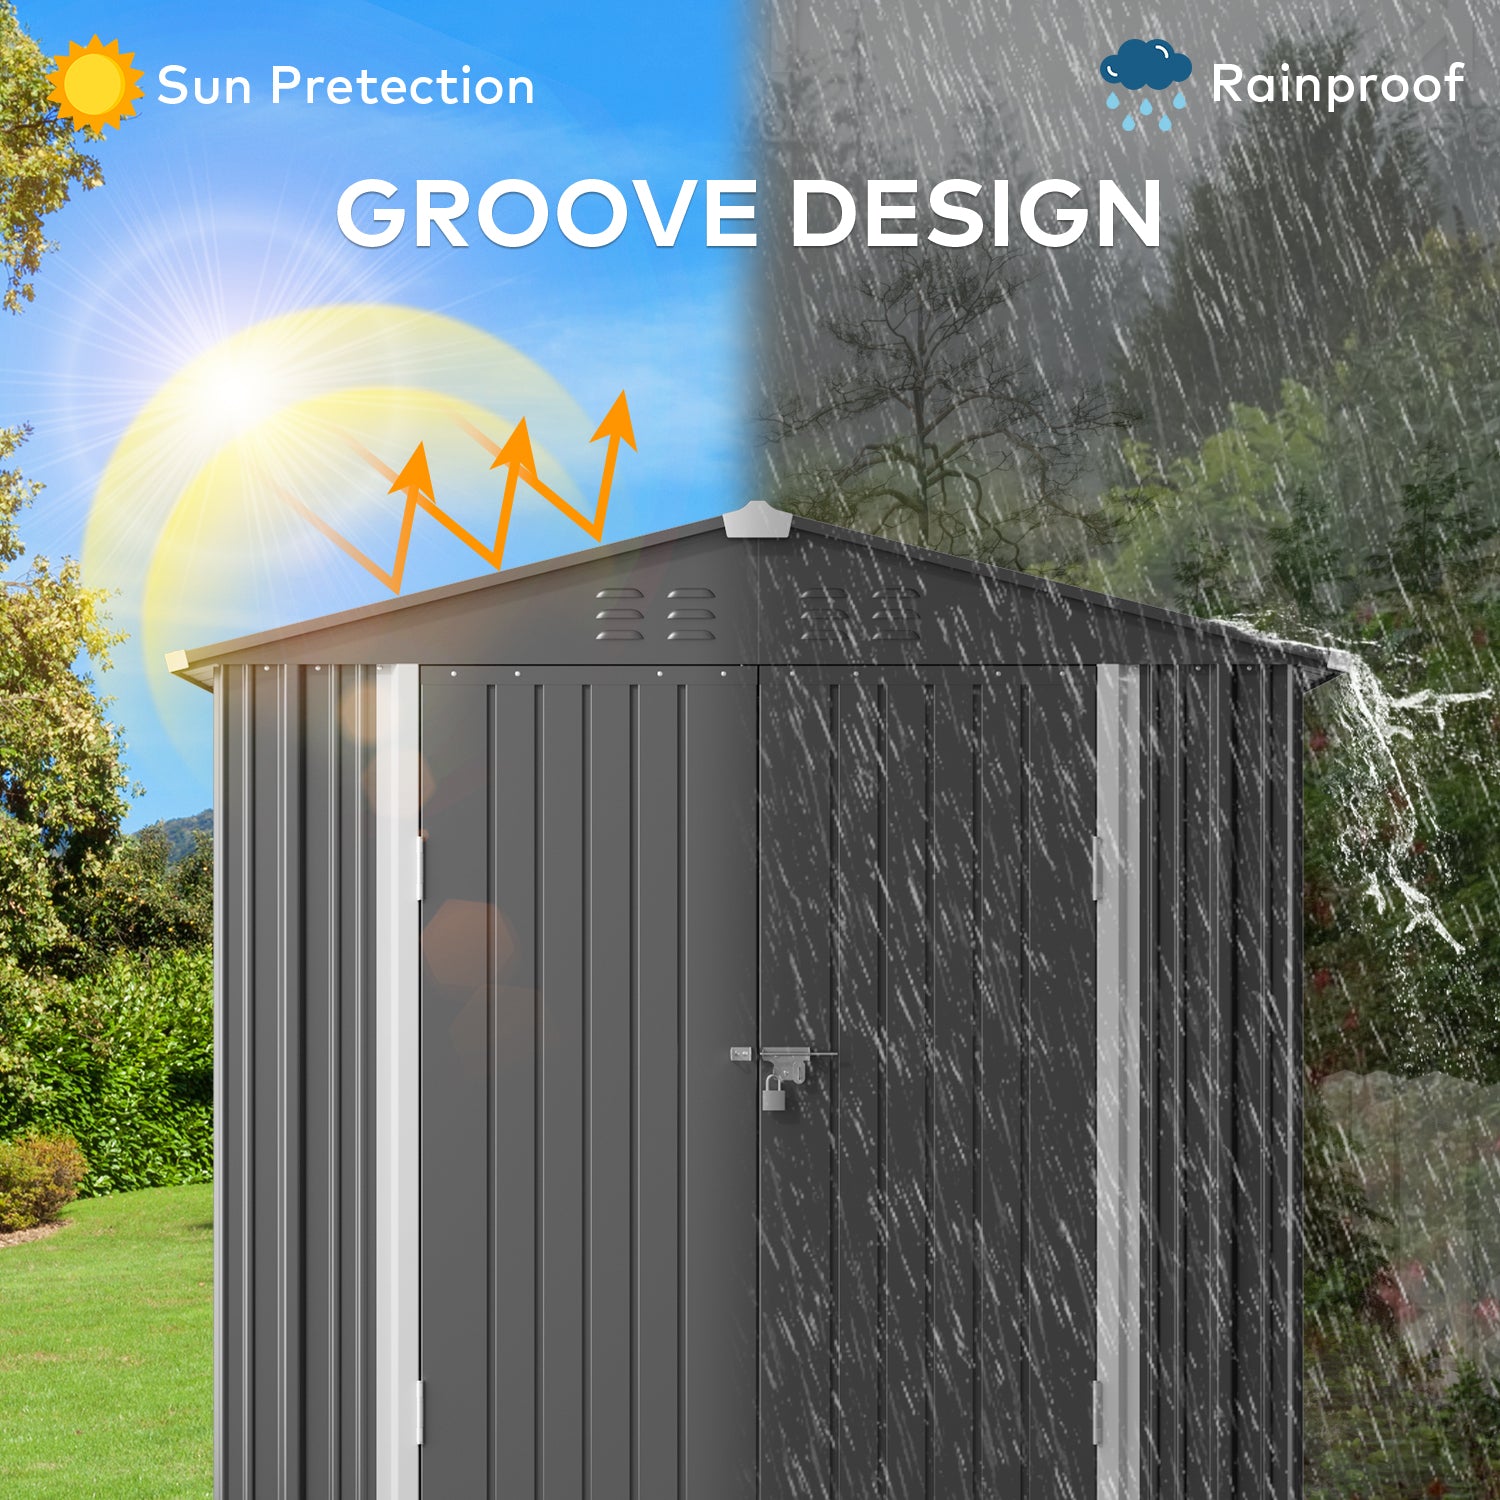 Gizoon CC11 Outdoor Storage Shed with Metal Base Frame and Double Lockable Doors